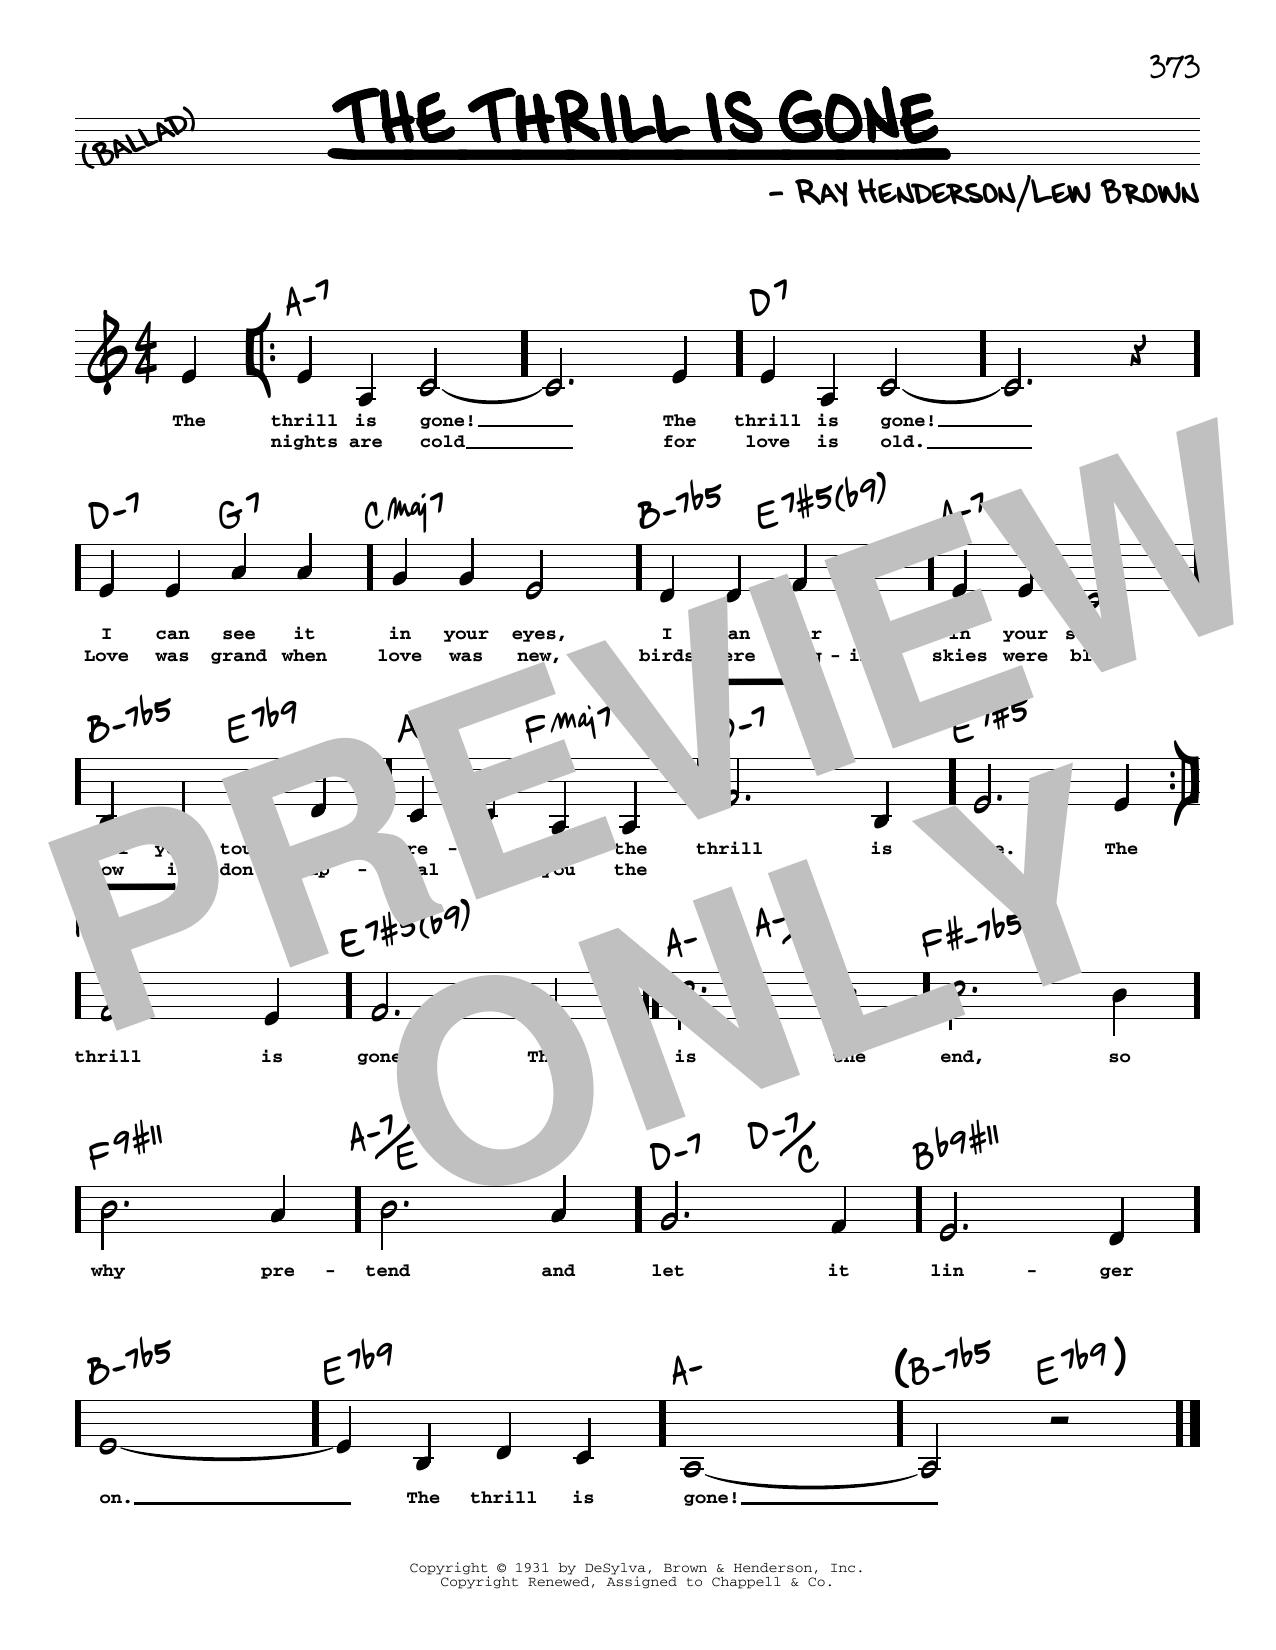 Download Lew Brown The Thrill Is Gone (Low Voice) Sheet Music